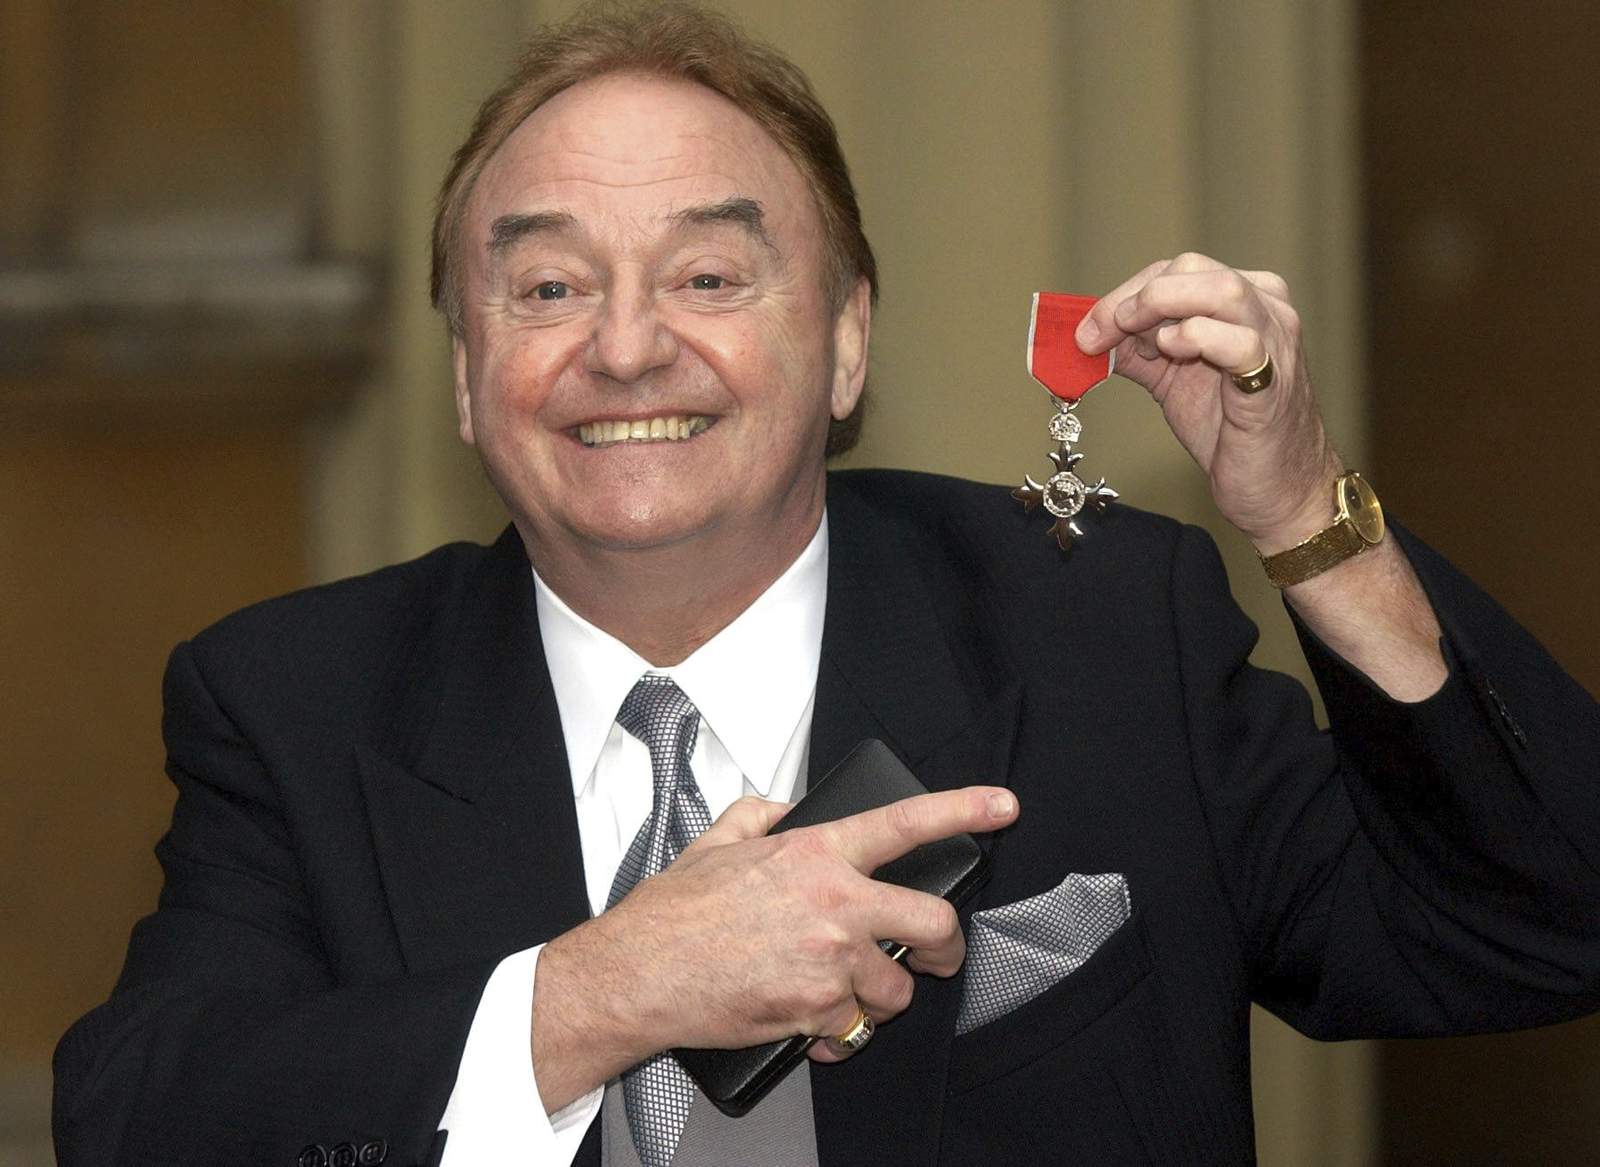 ‘You’ll Never Walk Alone:’ Singer Gerry Marsden dies at 78